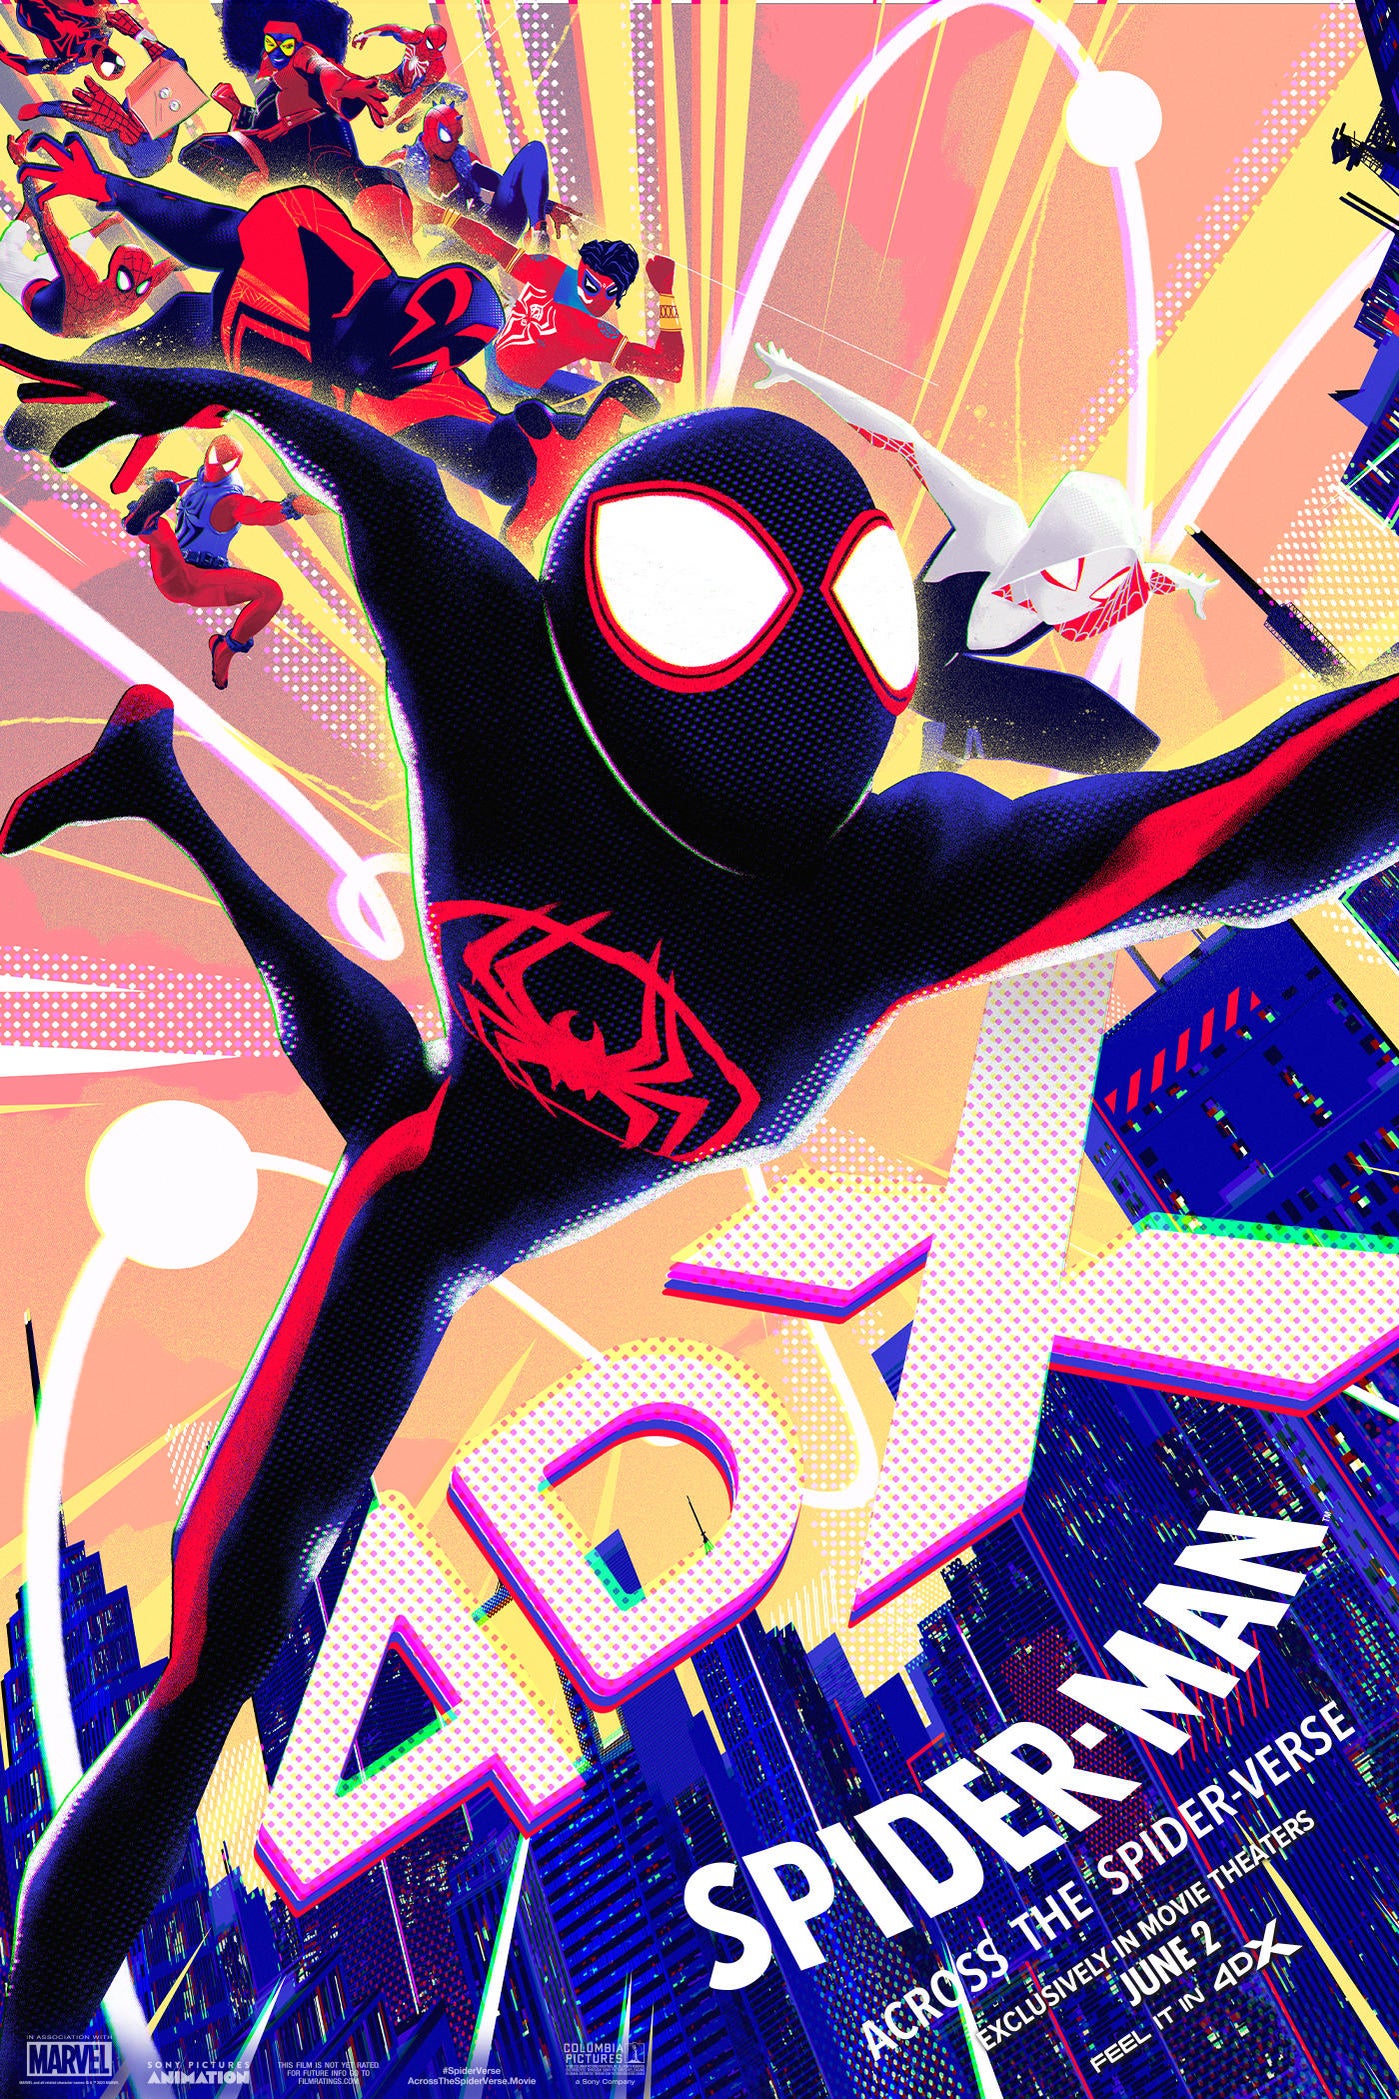 Spider-Man: Across the Spider-Verse Poster Features Colorful Cast